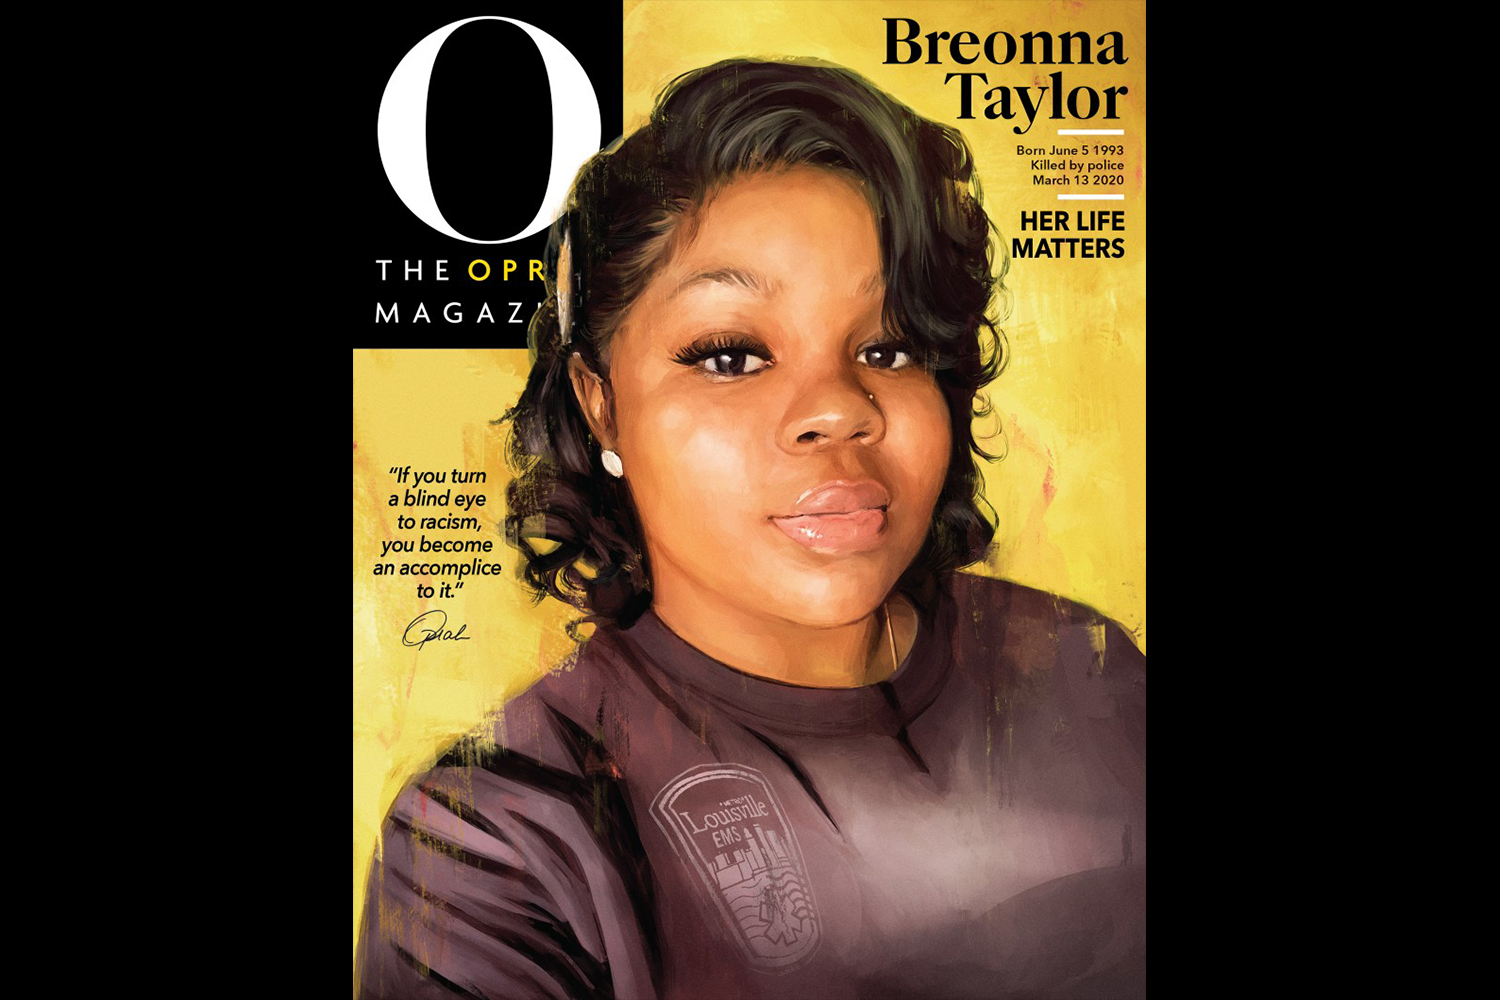 Breonna Taylor on the cover of O, The Oprah Magazine